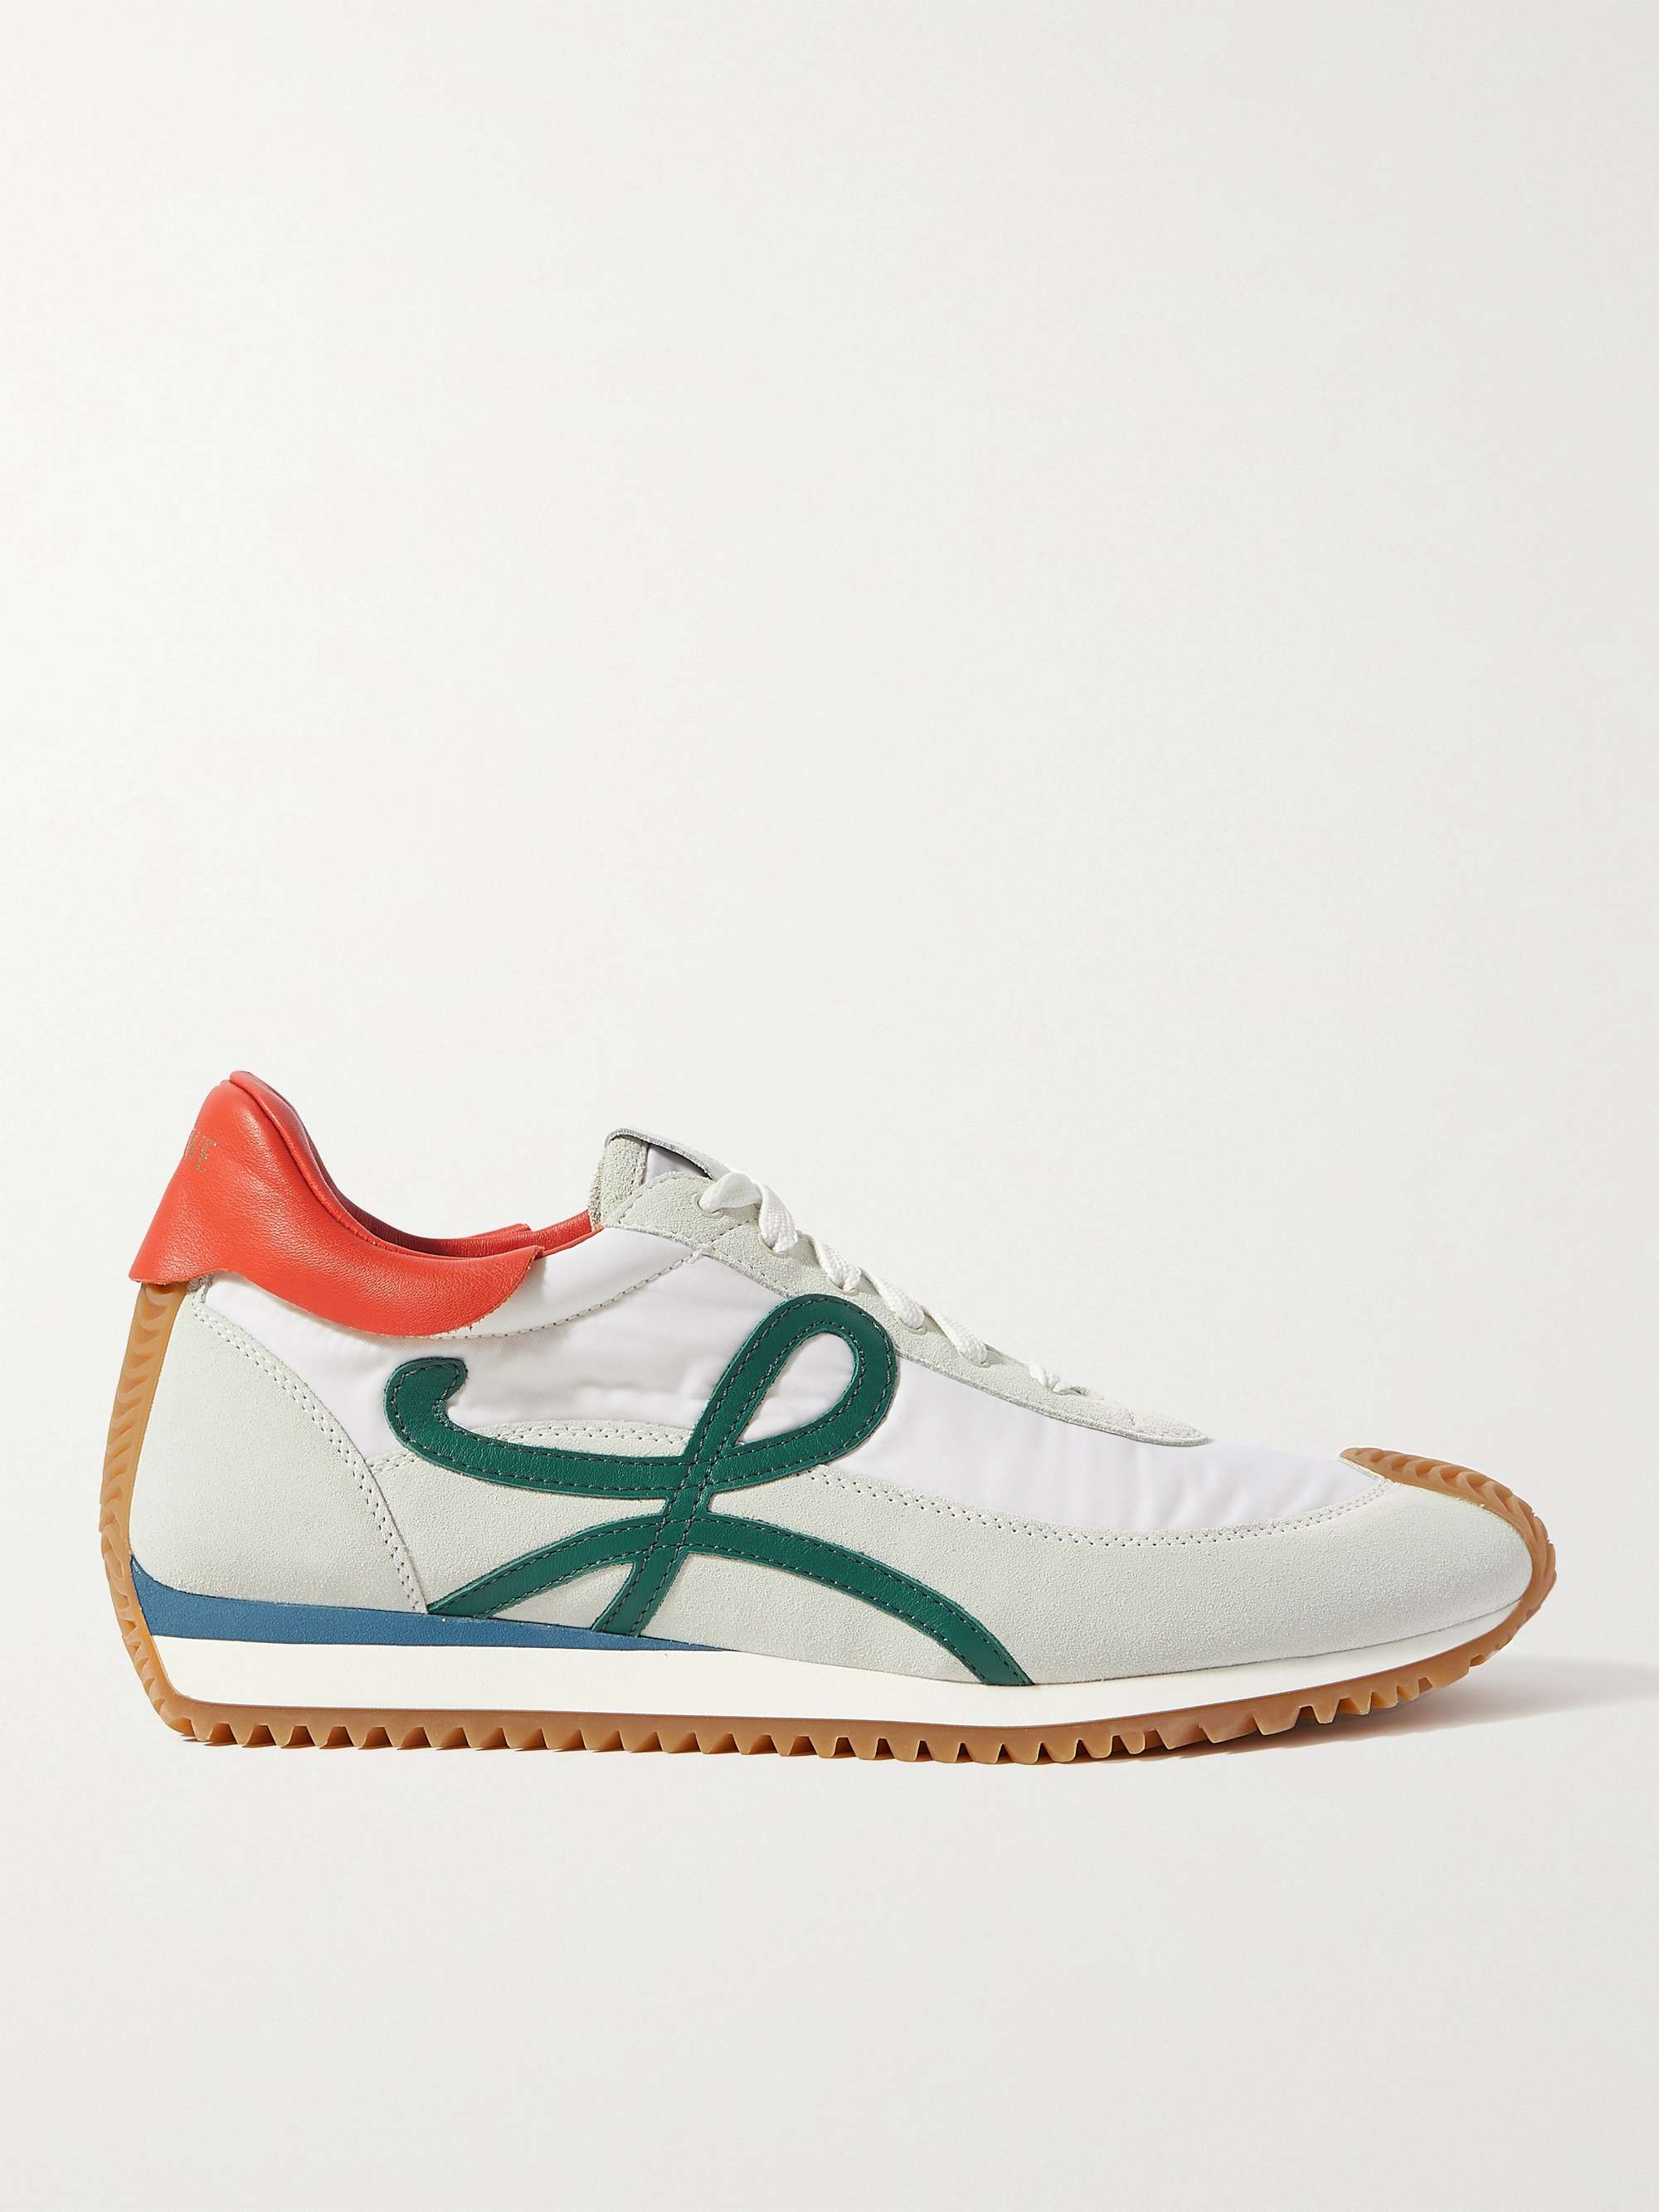 + Paula's Ibiza Flow Runner Leather-Trimmed Nylon and Suede Sneakers